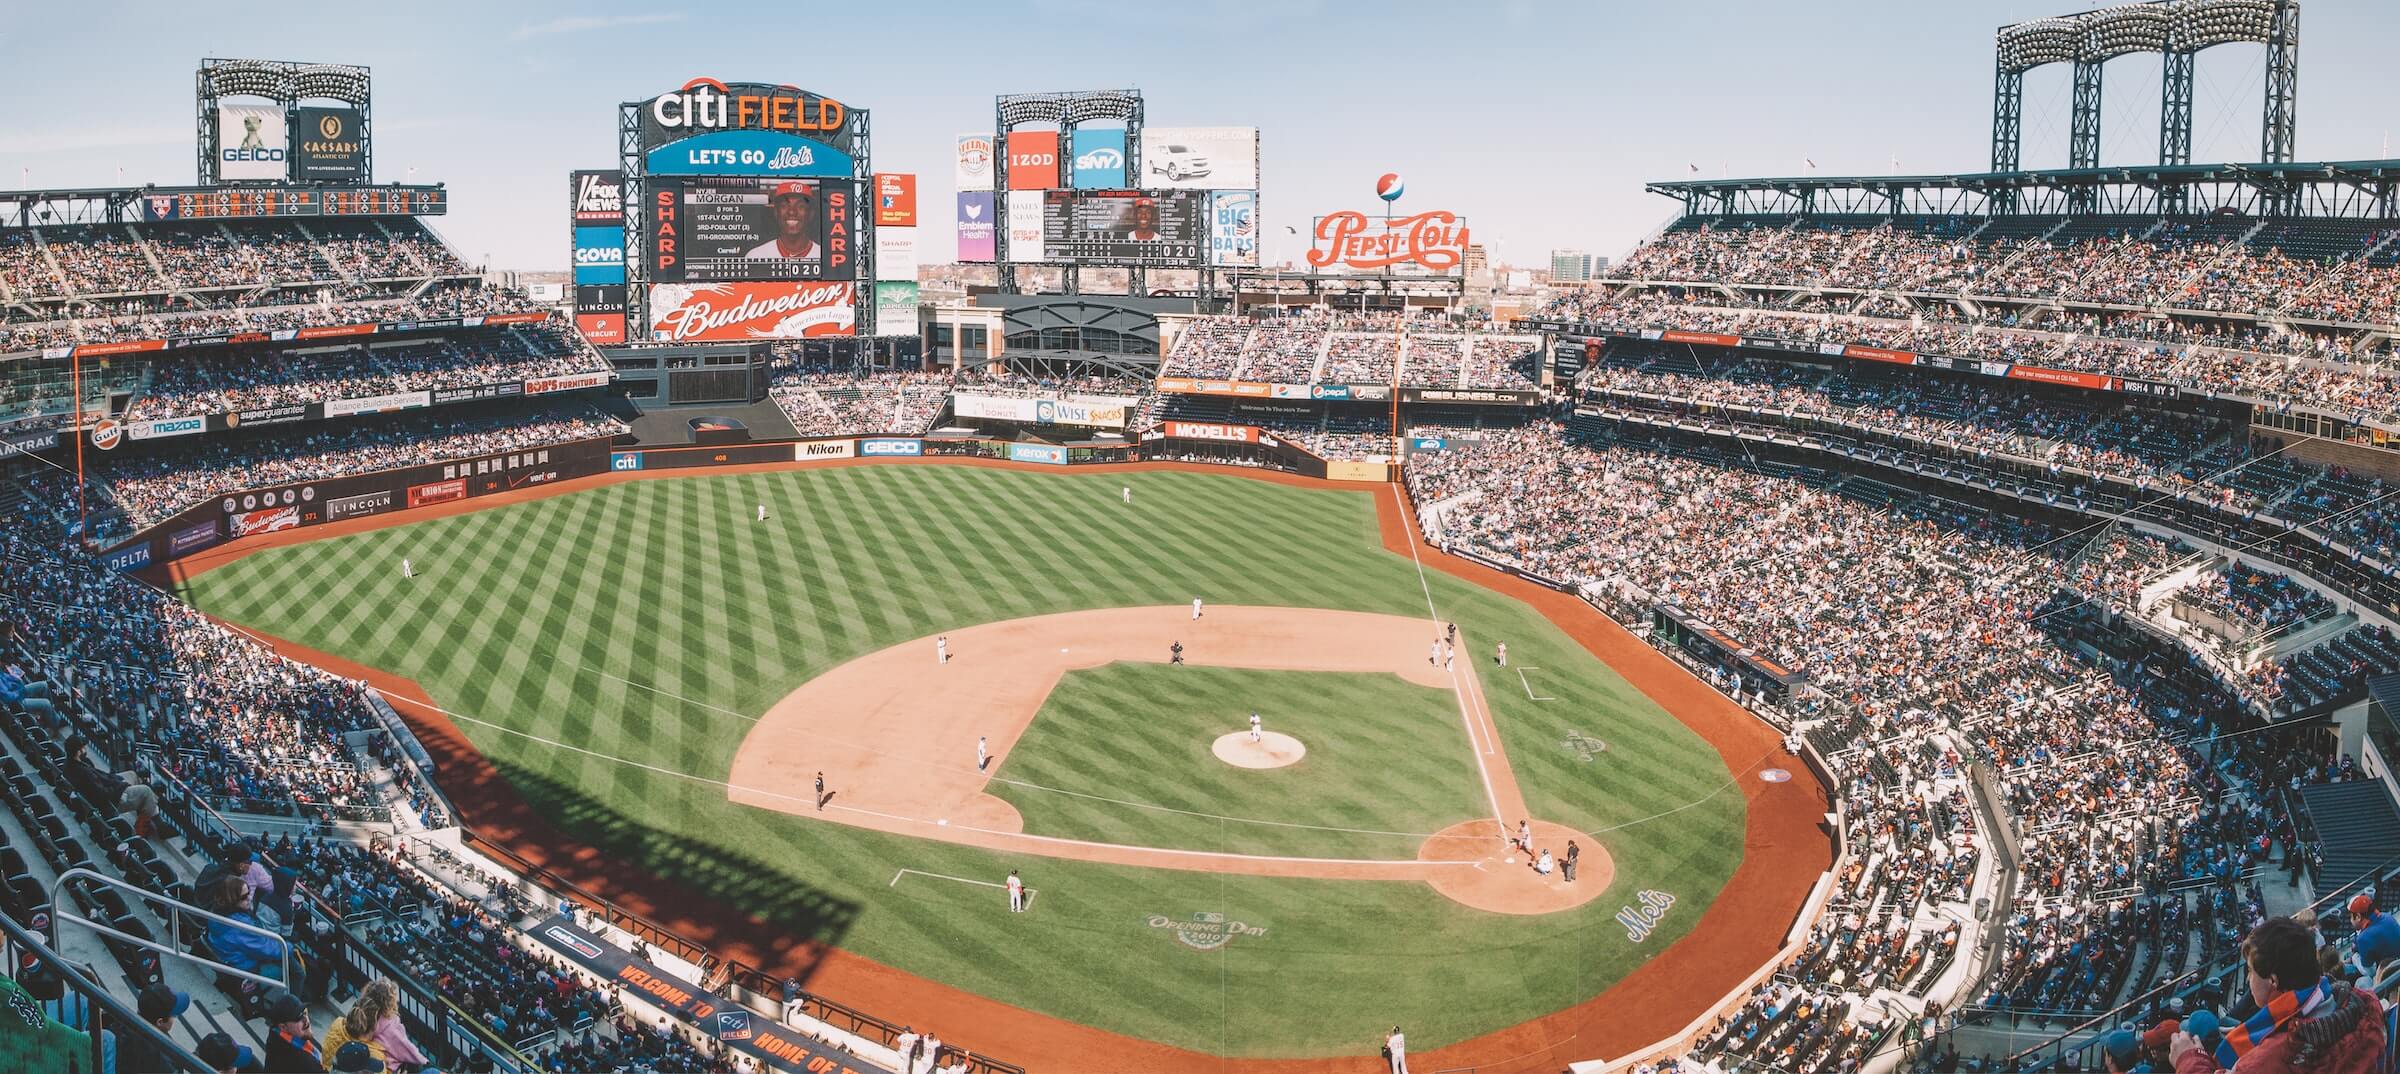 Backpacks Banned At Citi Field - CBS New York